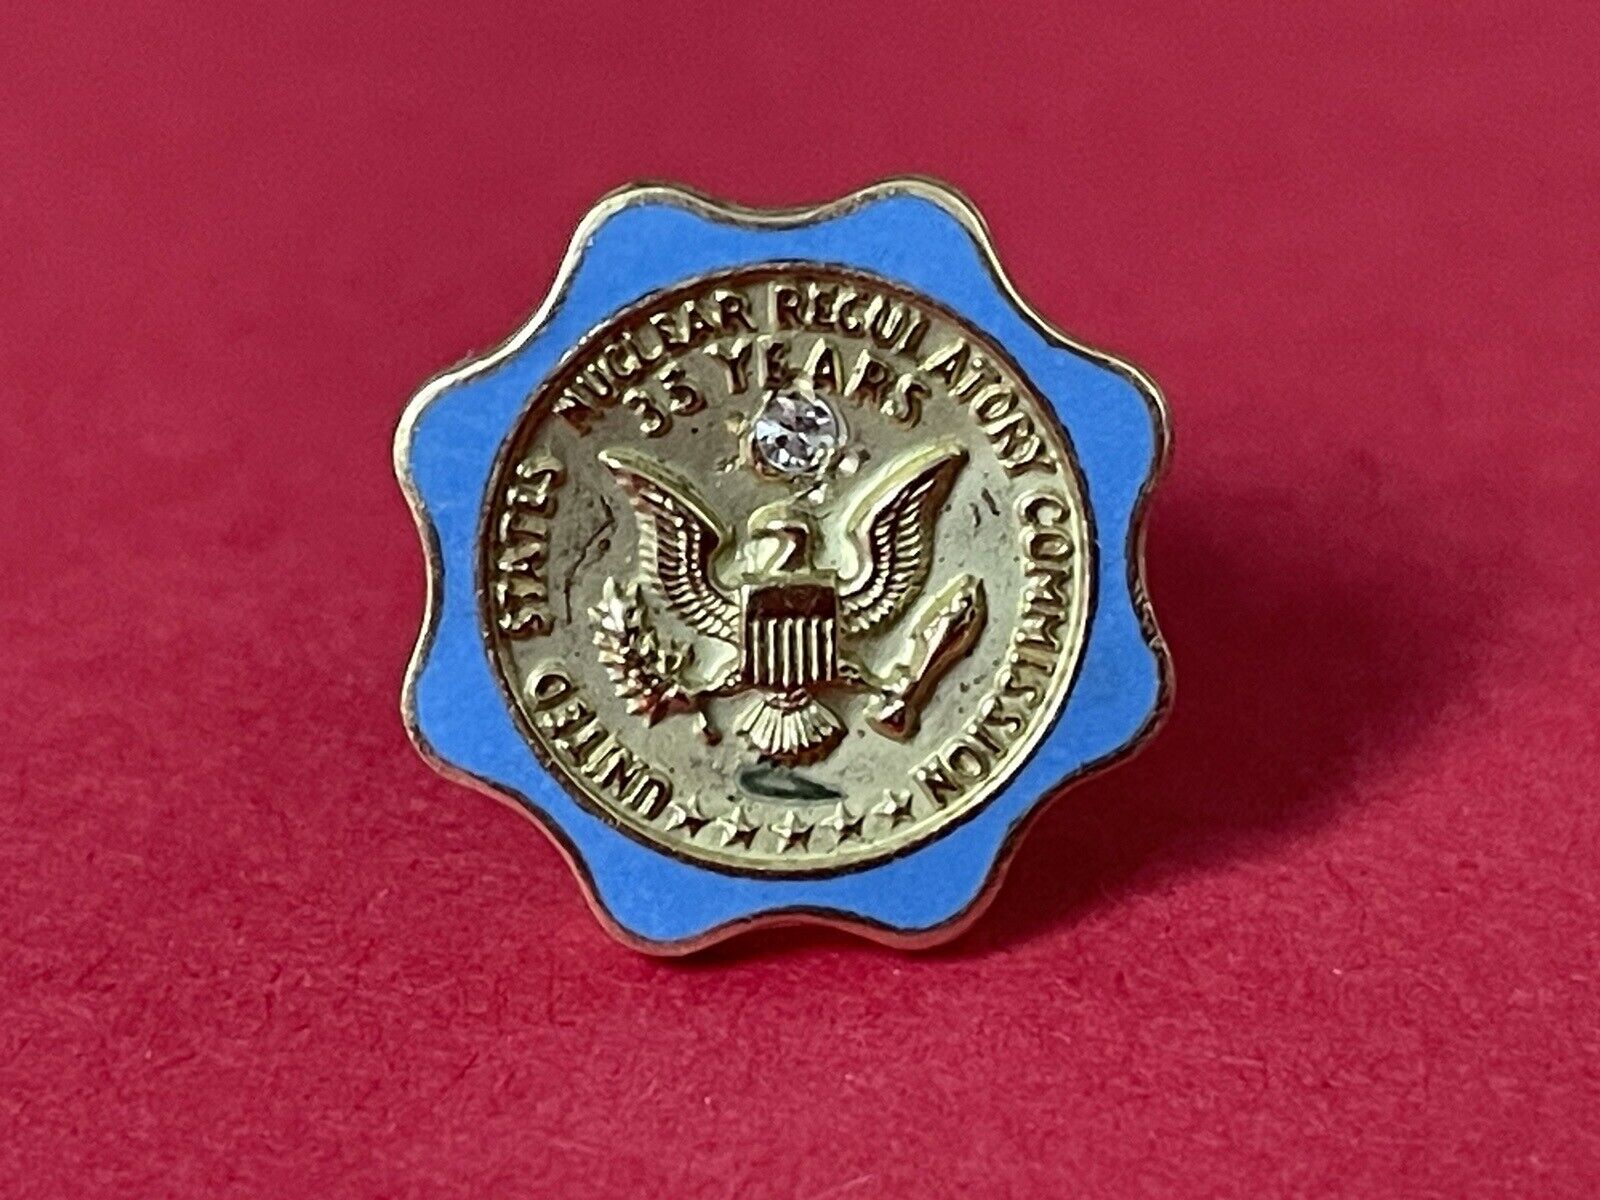 RARE 35 Years Service 14k GOLD United States Nuclear Regulatory Commission Pin